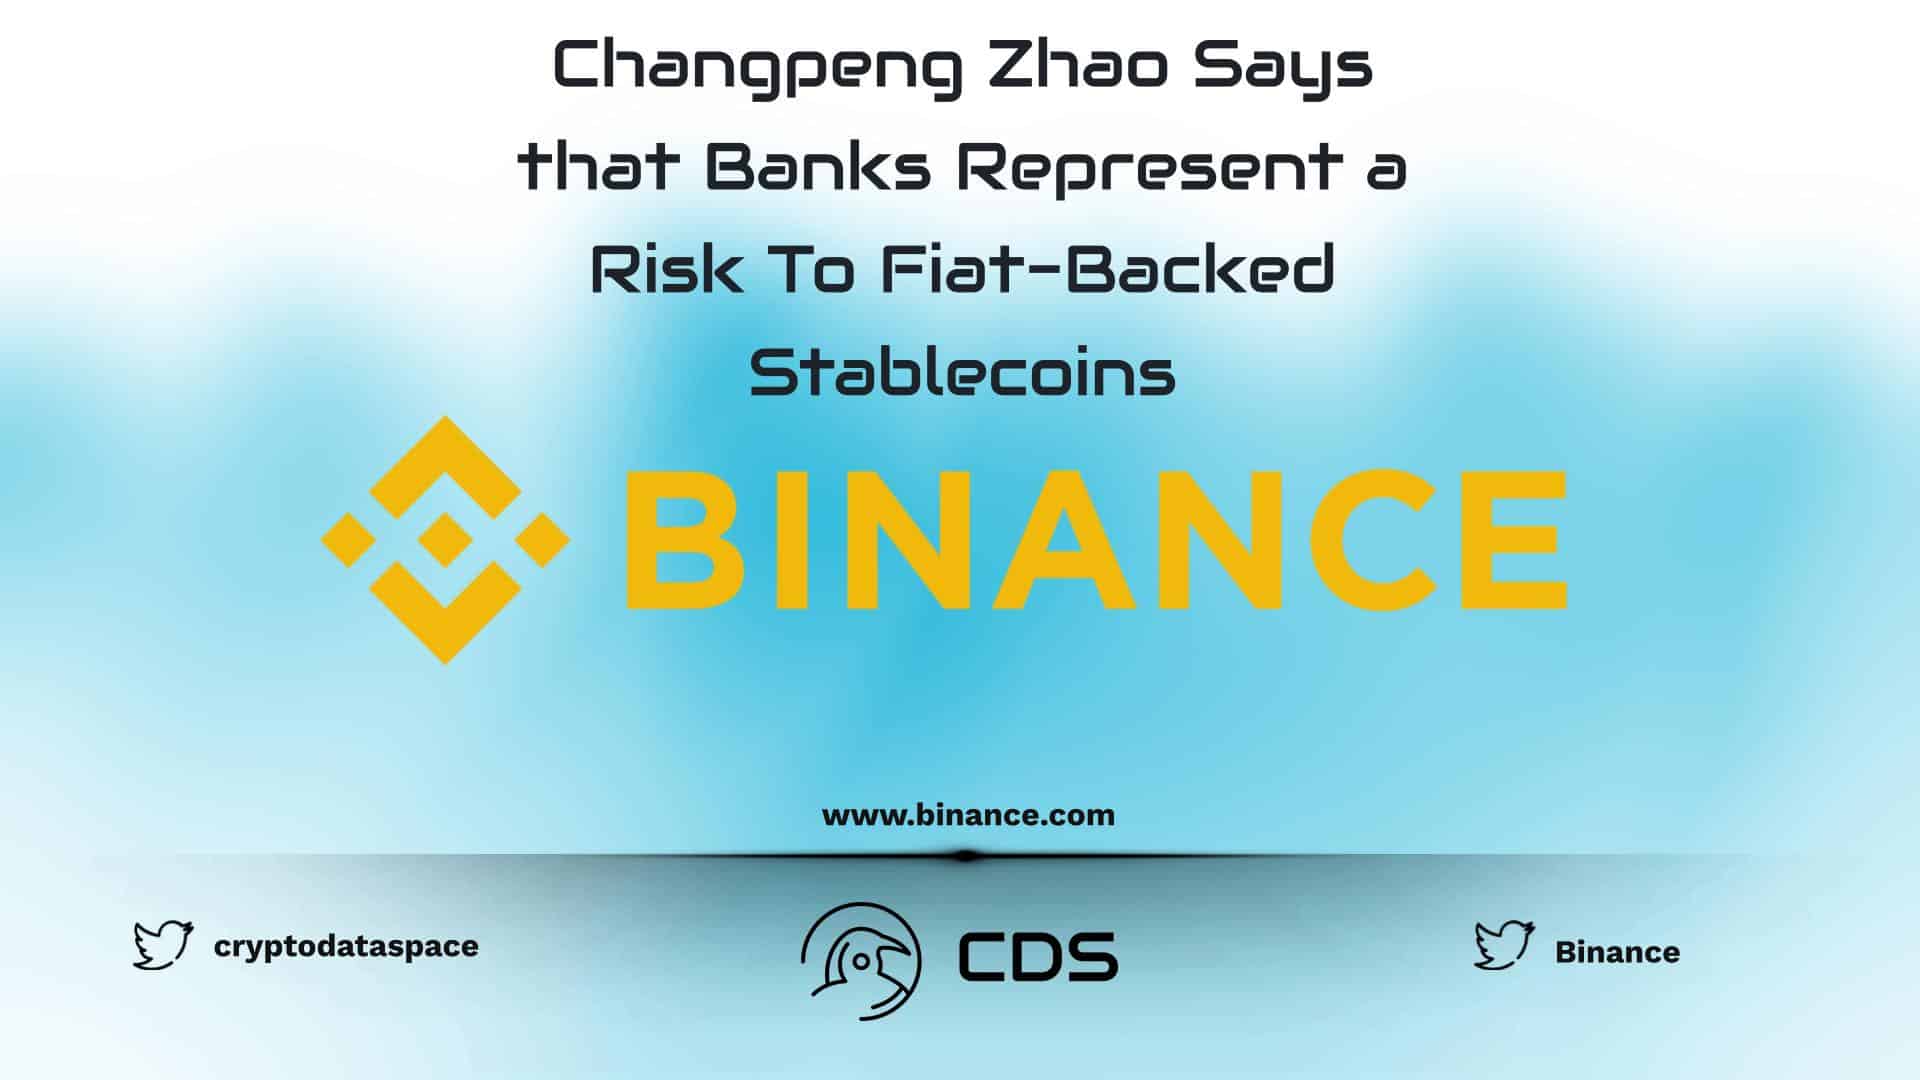 Changpeng Zhao Says that Banks Represent a Risk To Fiat-Backed Stablecoins